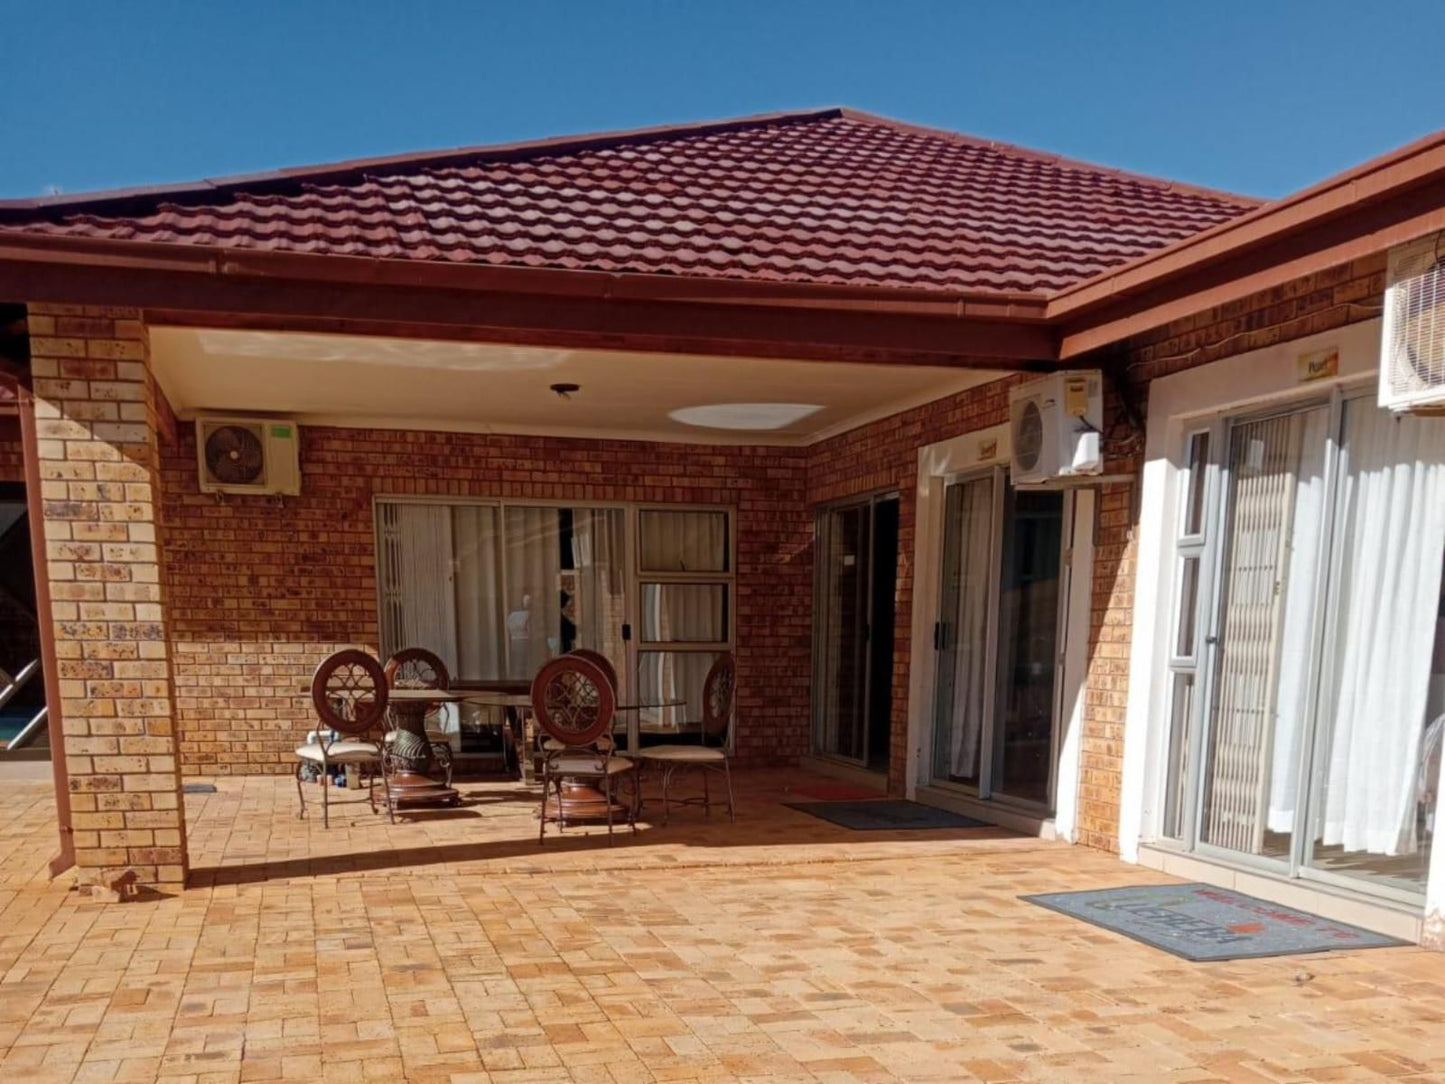 Quereba Bed And Breakfast Riviera Park Mahikeng North West Province South Africa House, Building, Architecture